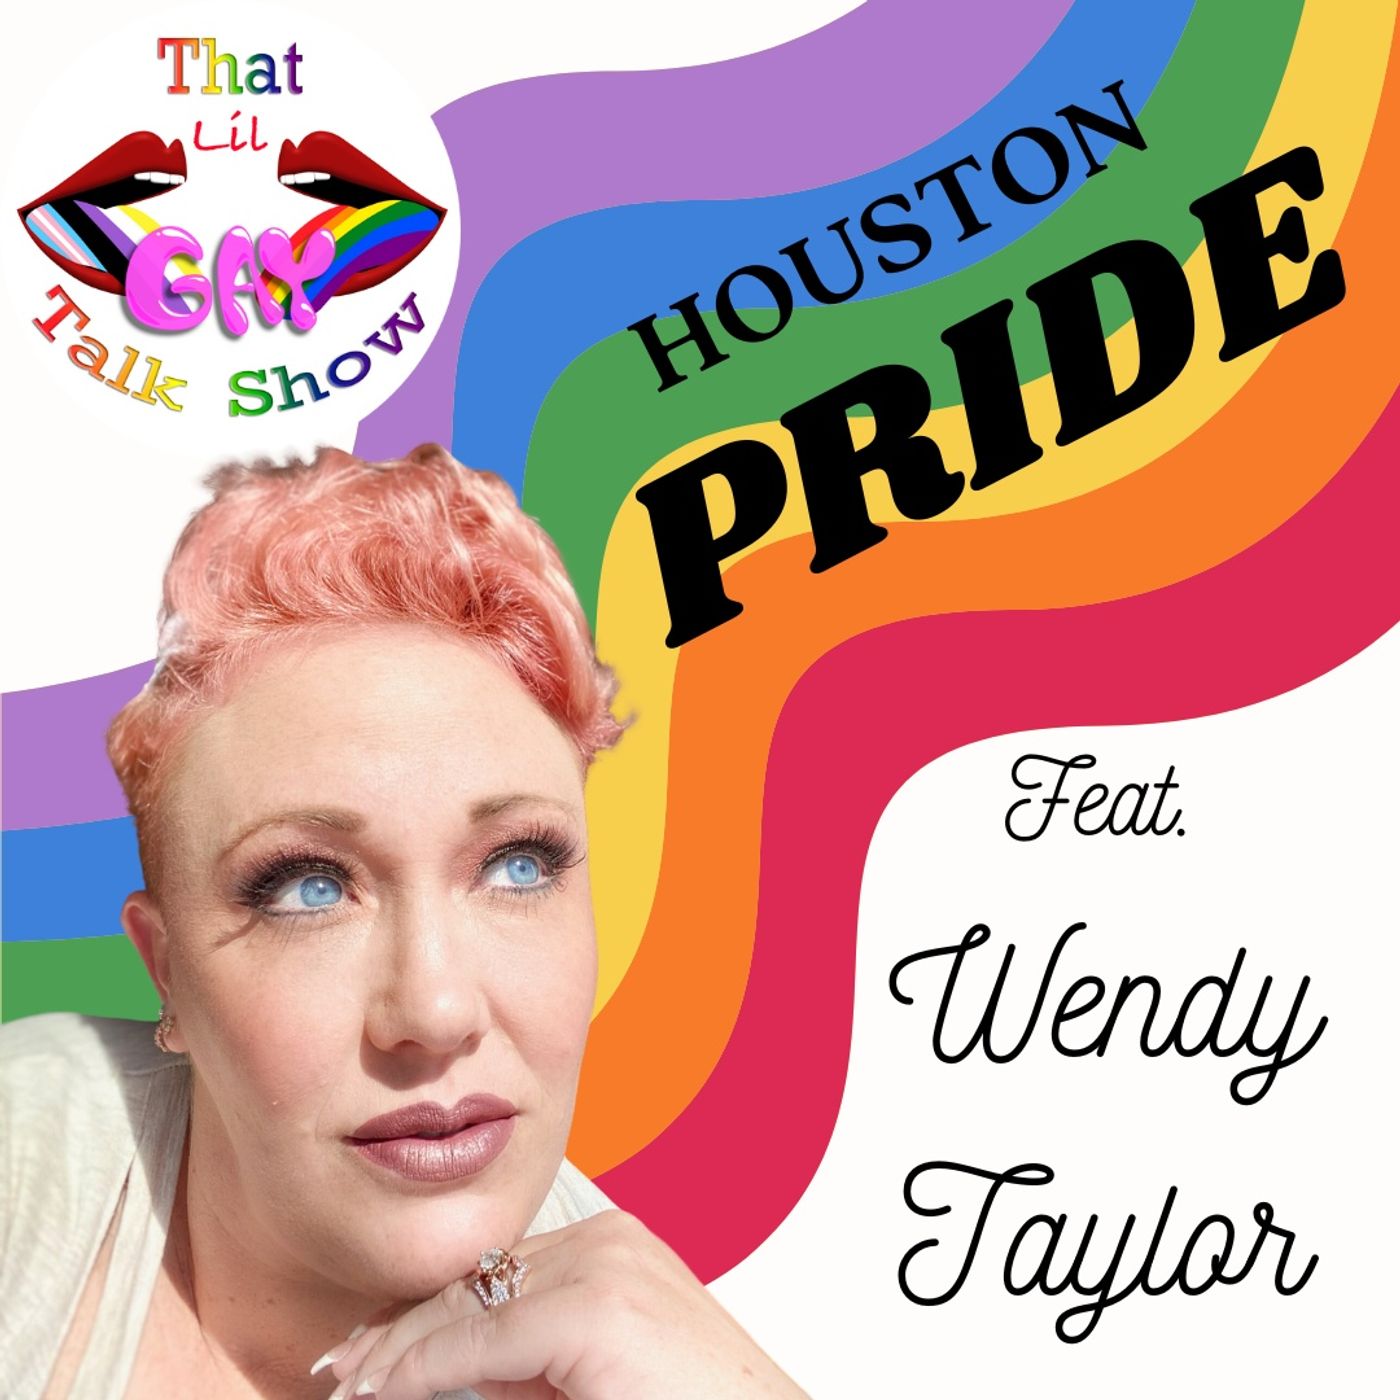 The Why of Pride with Wendy Taylor